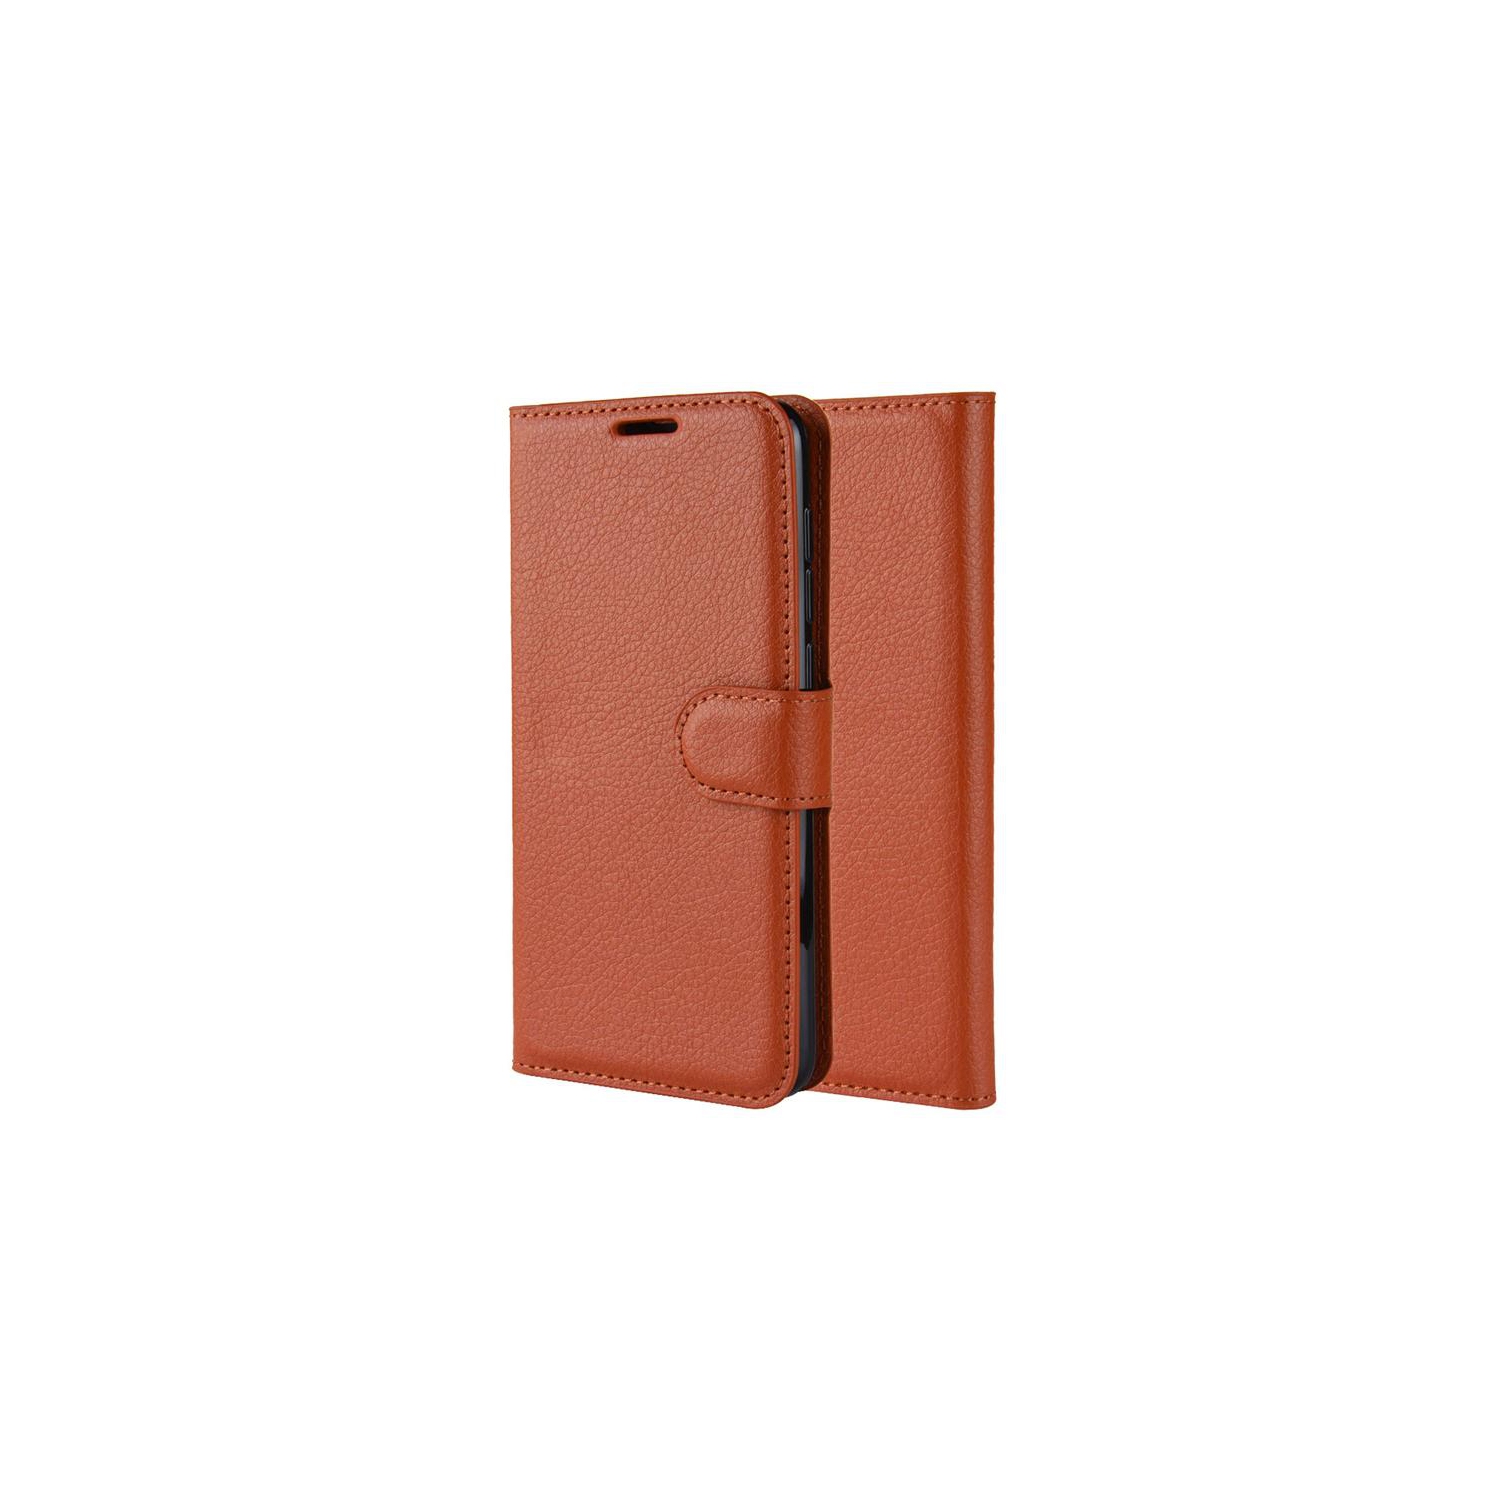 PANDACO Brown Leather Wallet Case for iPhone 13 Pro Max